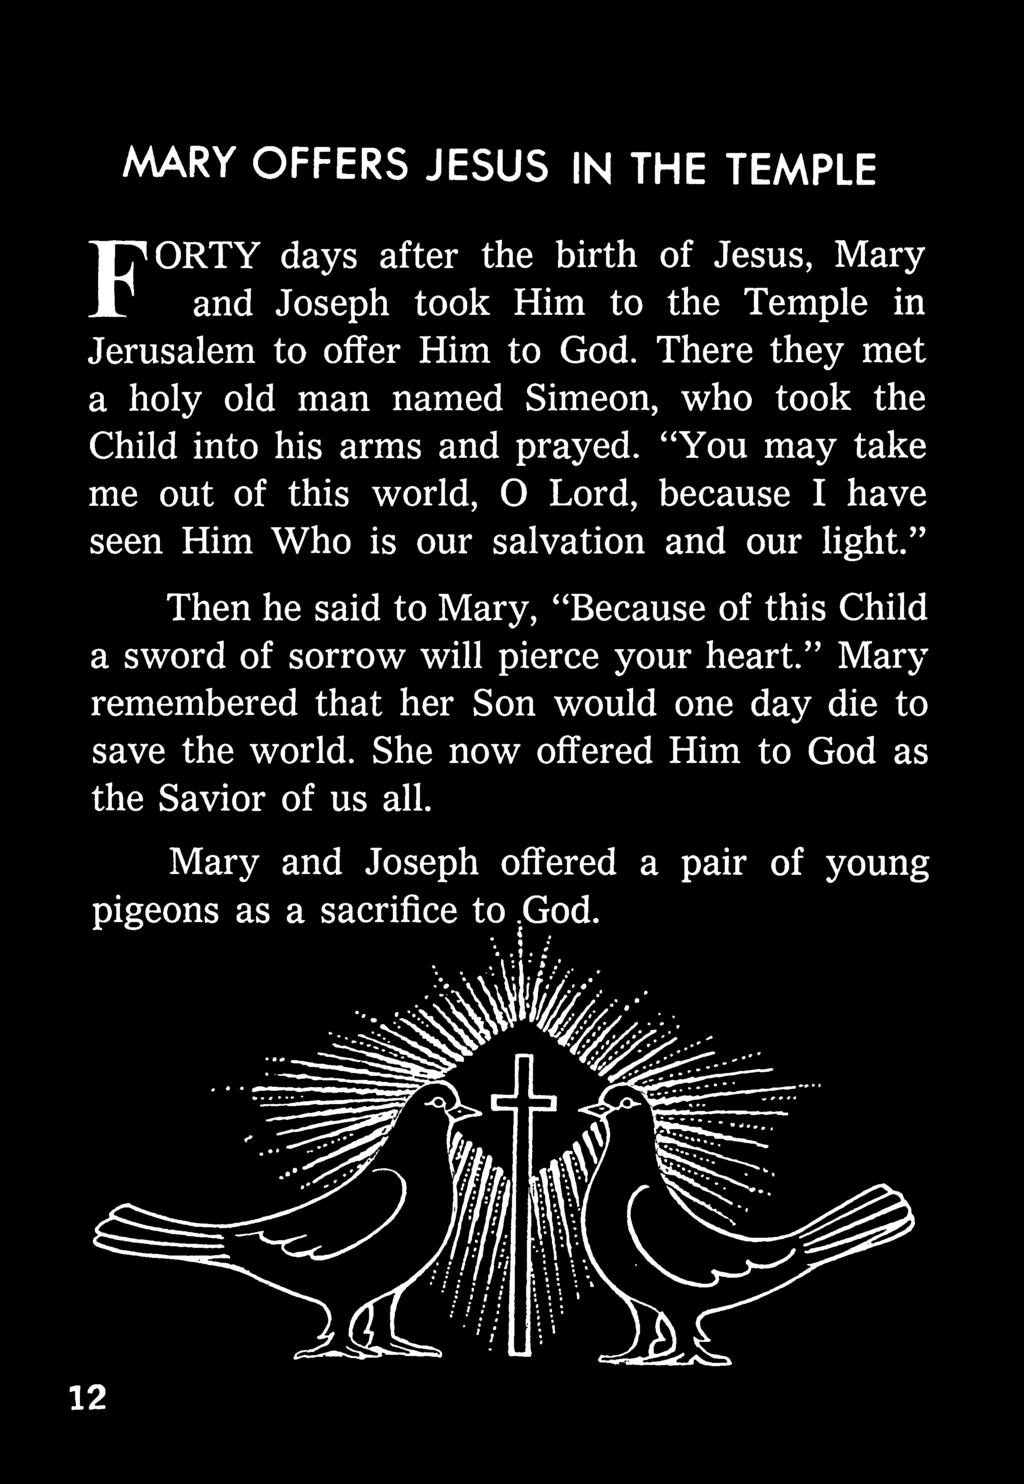 " Then he said to Mary, '^Because of this Child a sword of sorrow will pierce your heart.